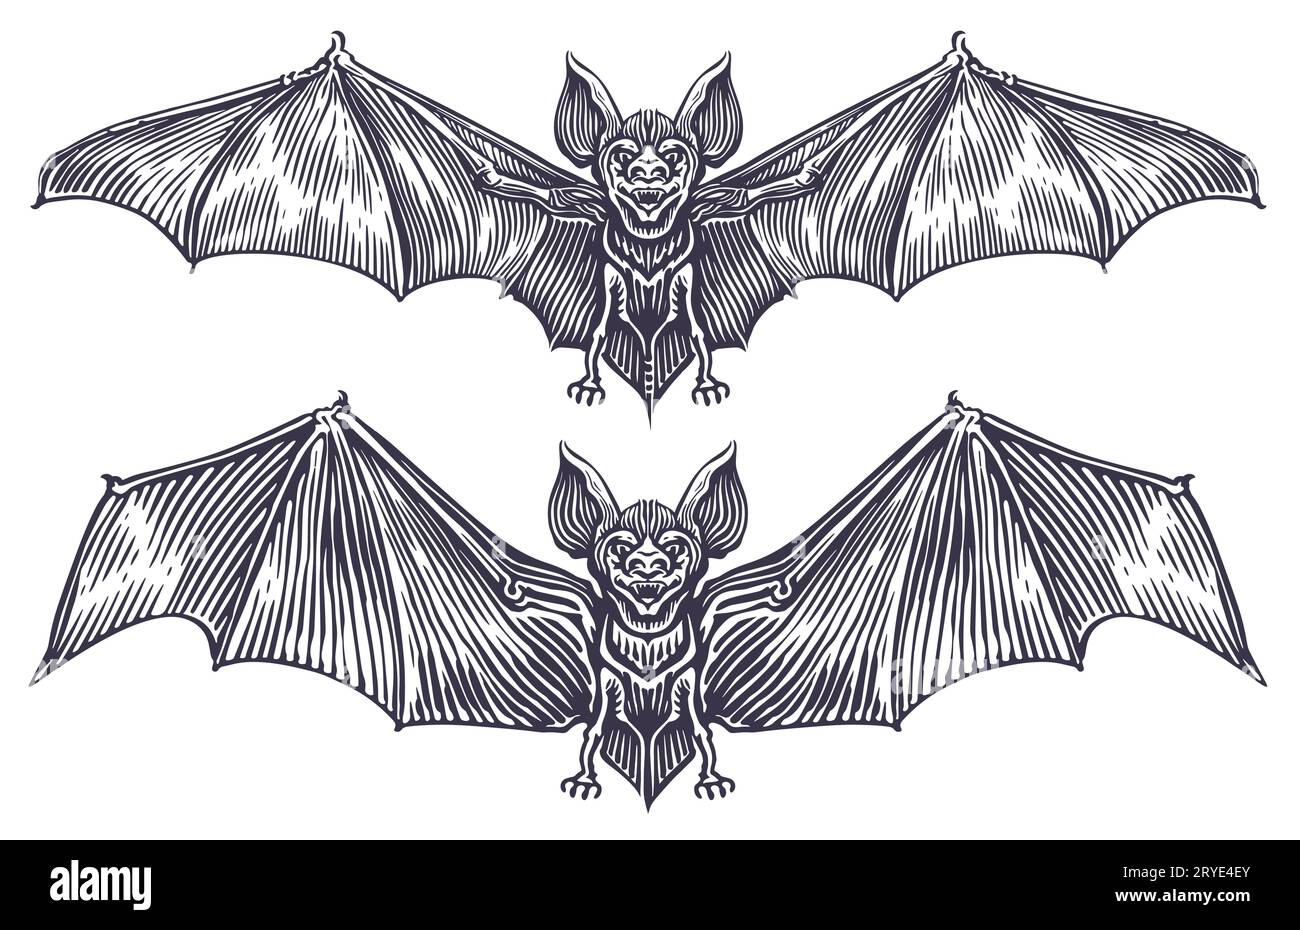 Bat in Gothic style engraving. Vintage sketch vector illustration Stock Vector